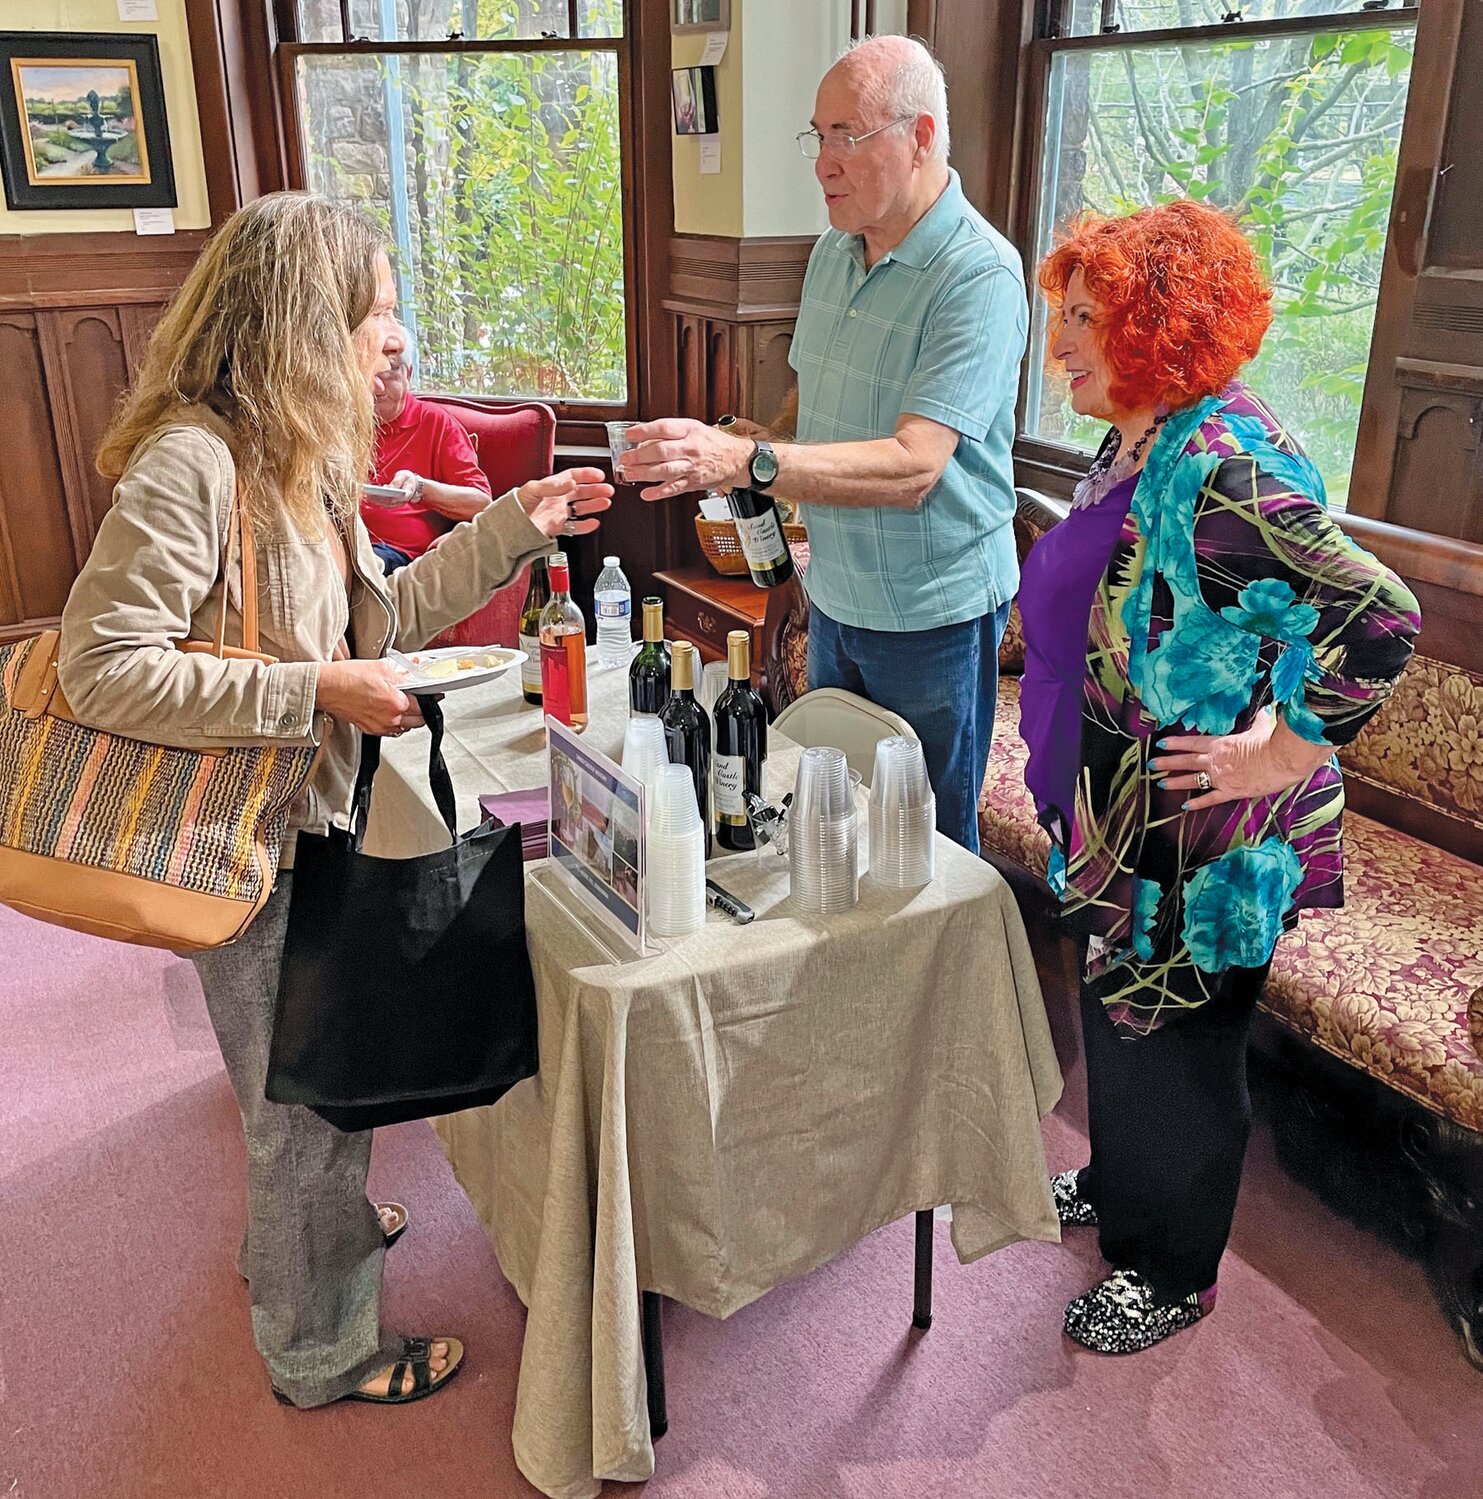 Chuck and Pearl Mintzer of New Hope volunteered at the Wine & Art Trail Exhibition, pouring wine from Sand Castle Winery.